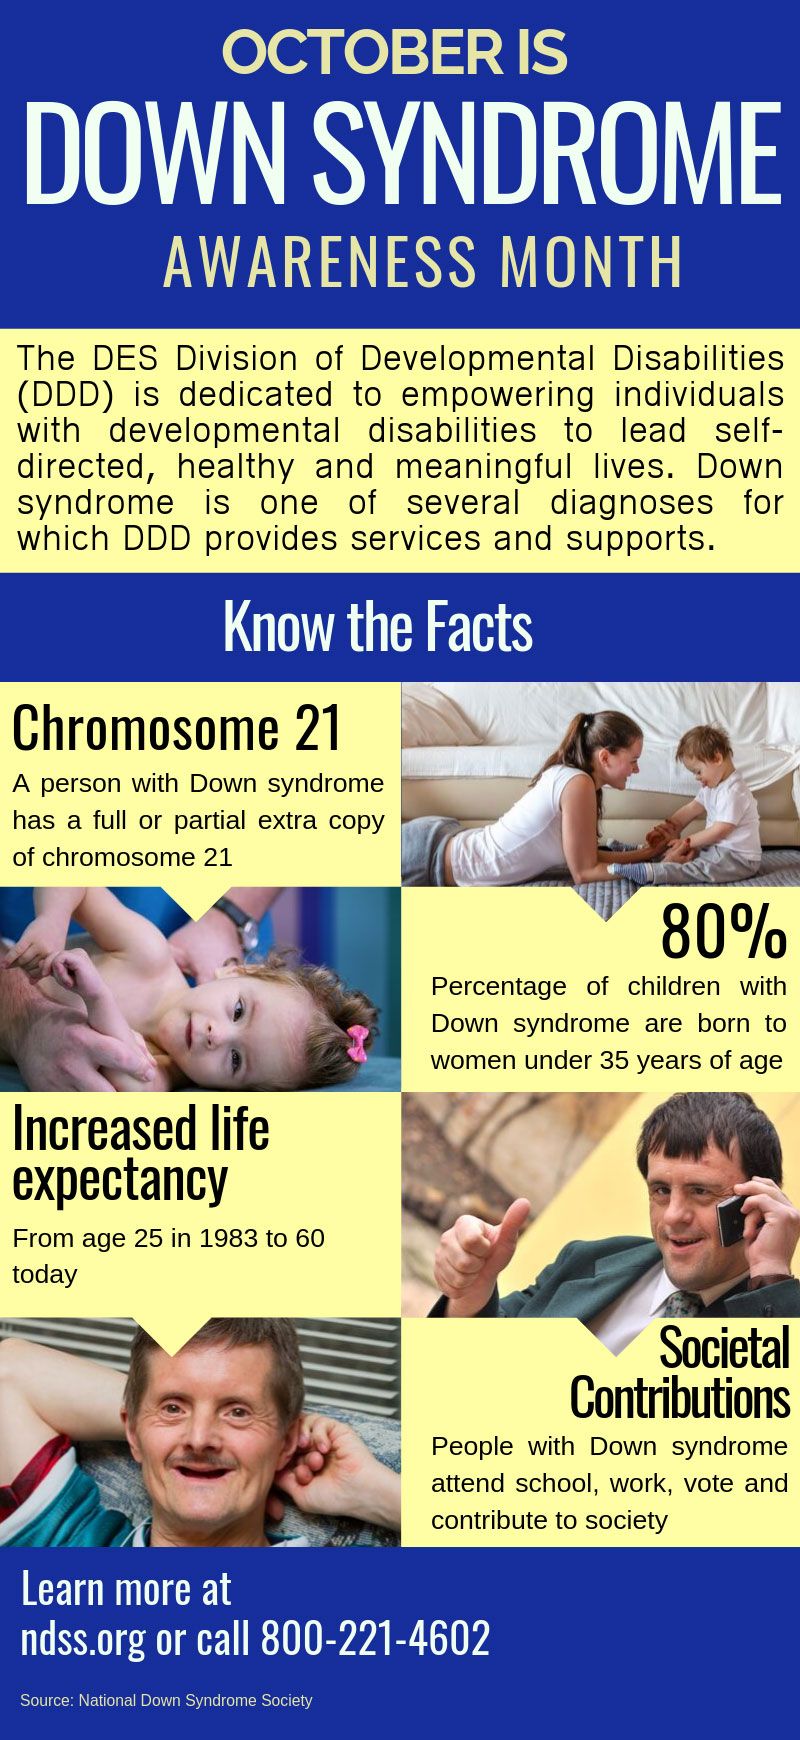 Facts and figures about Down syndrome Awareness Month